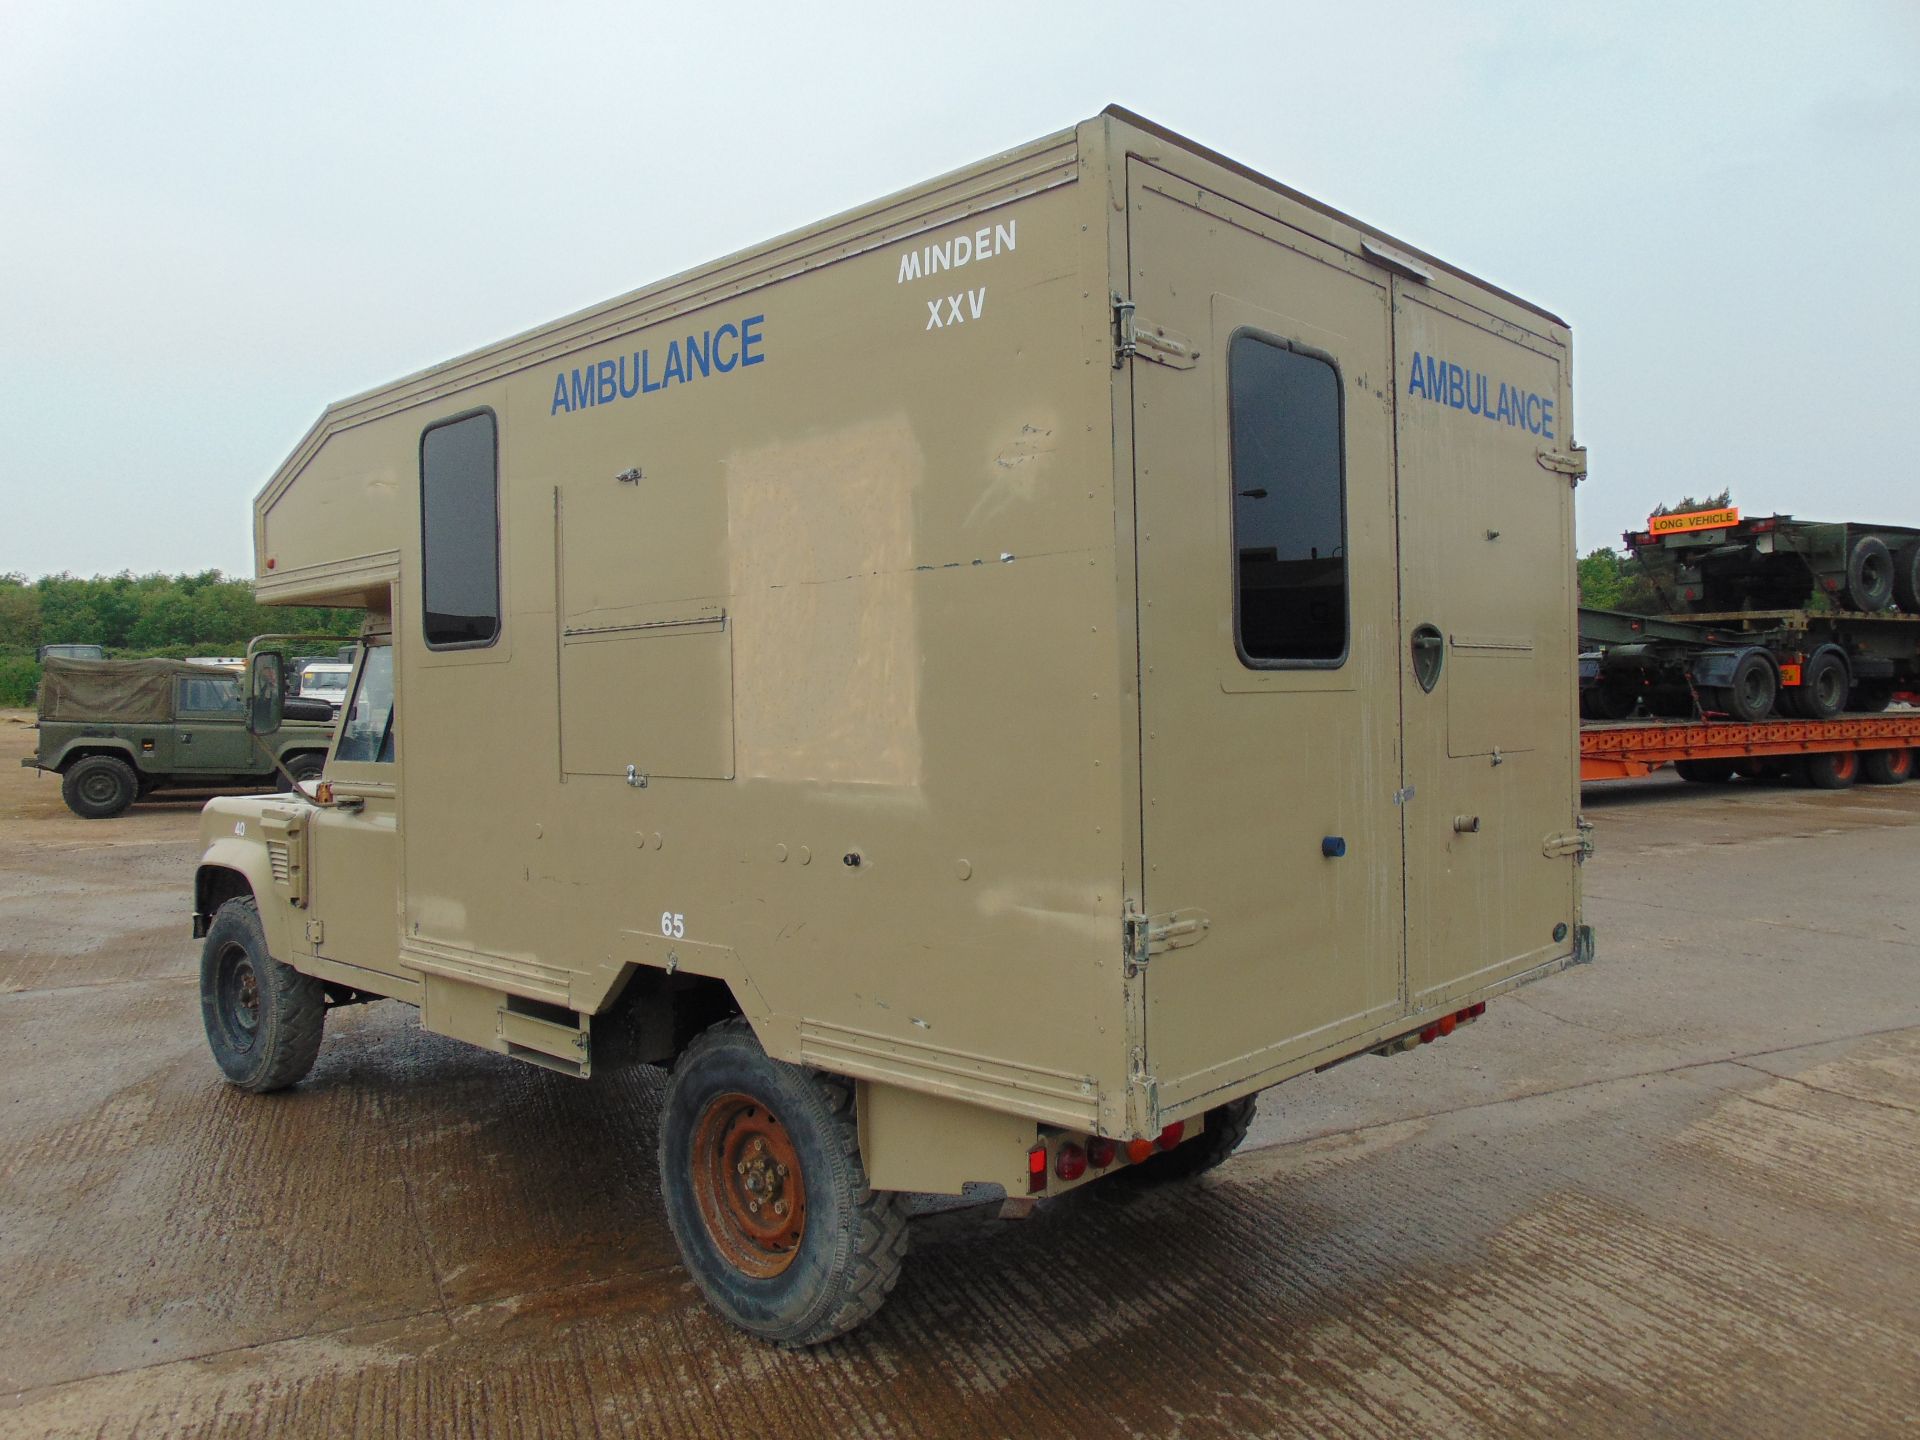 Military Specification Land Rover Wolf 130 ambulance - Image 6 of 18